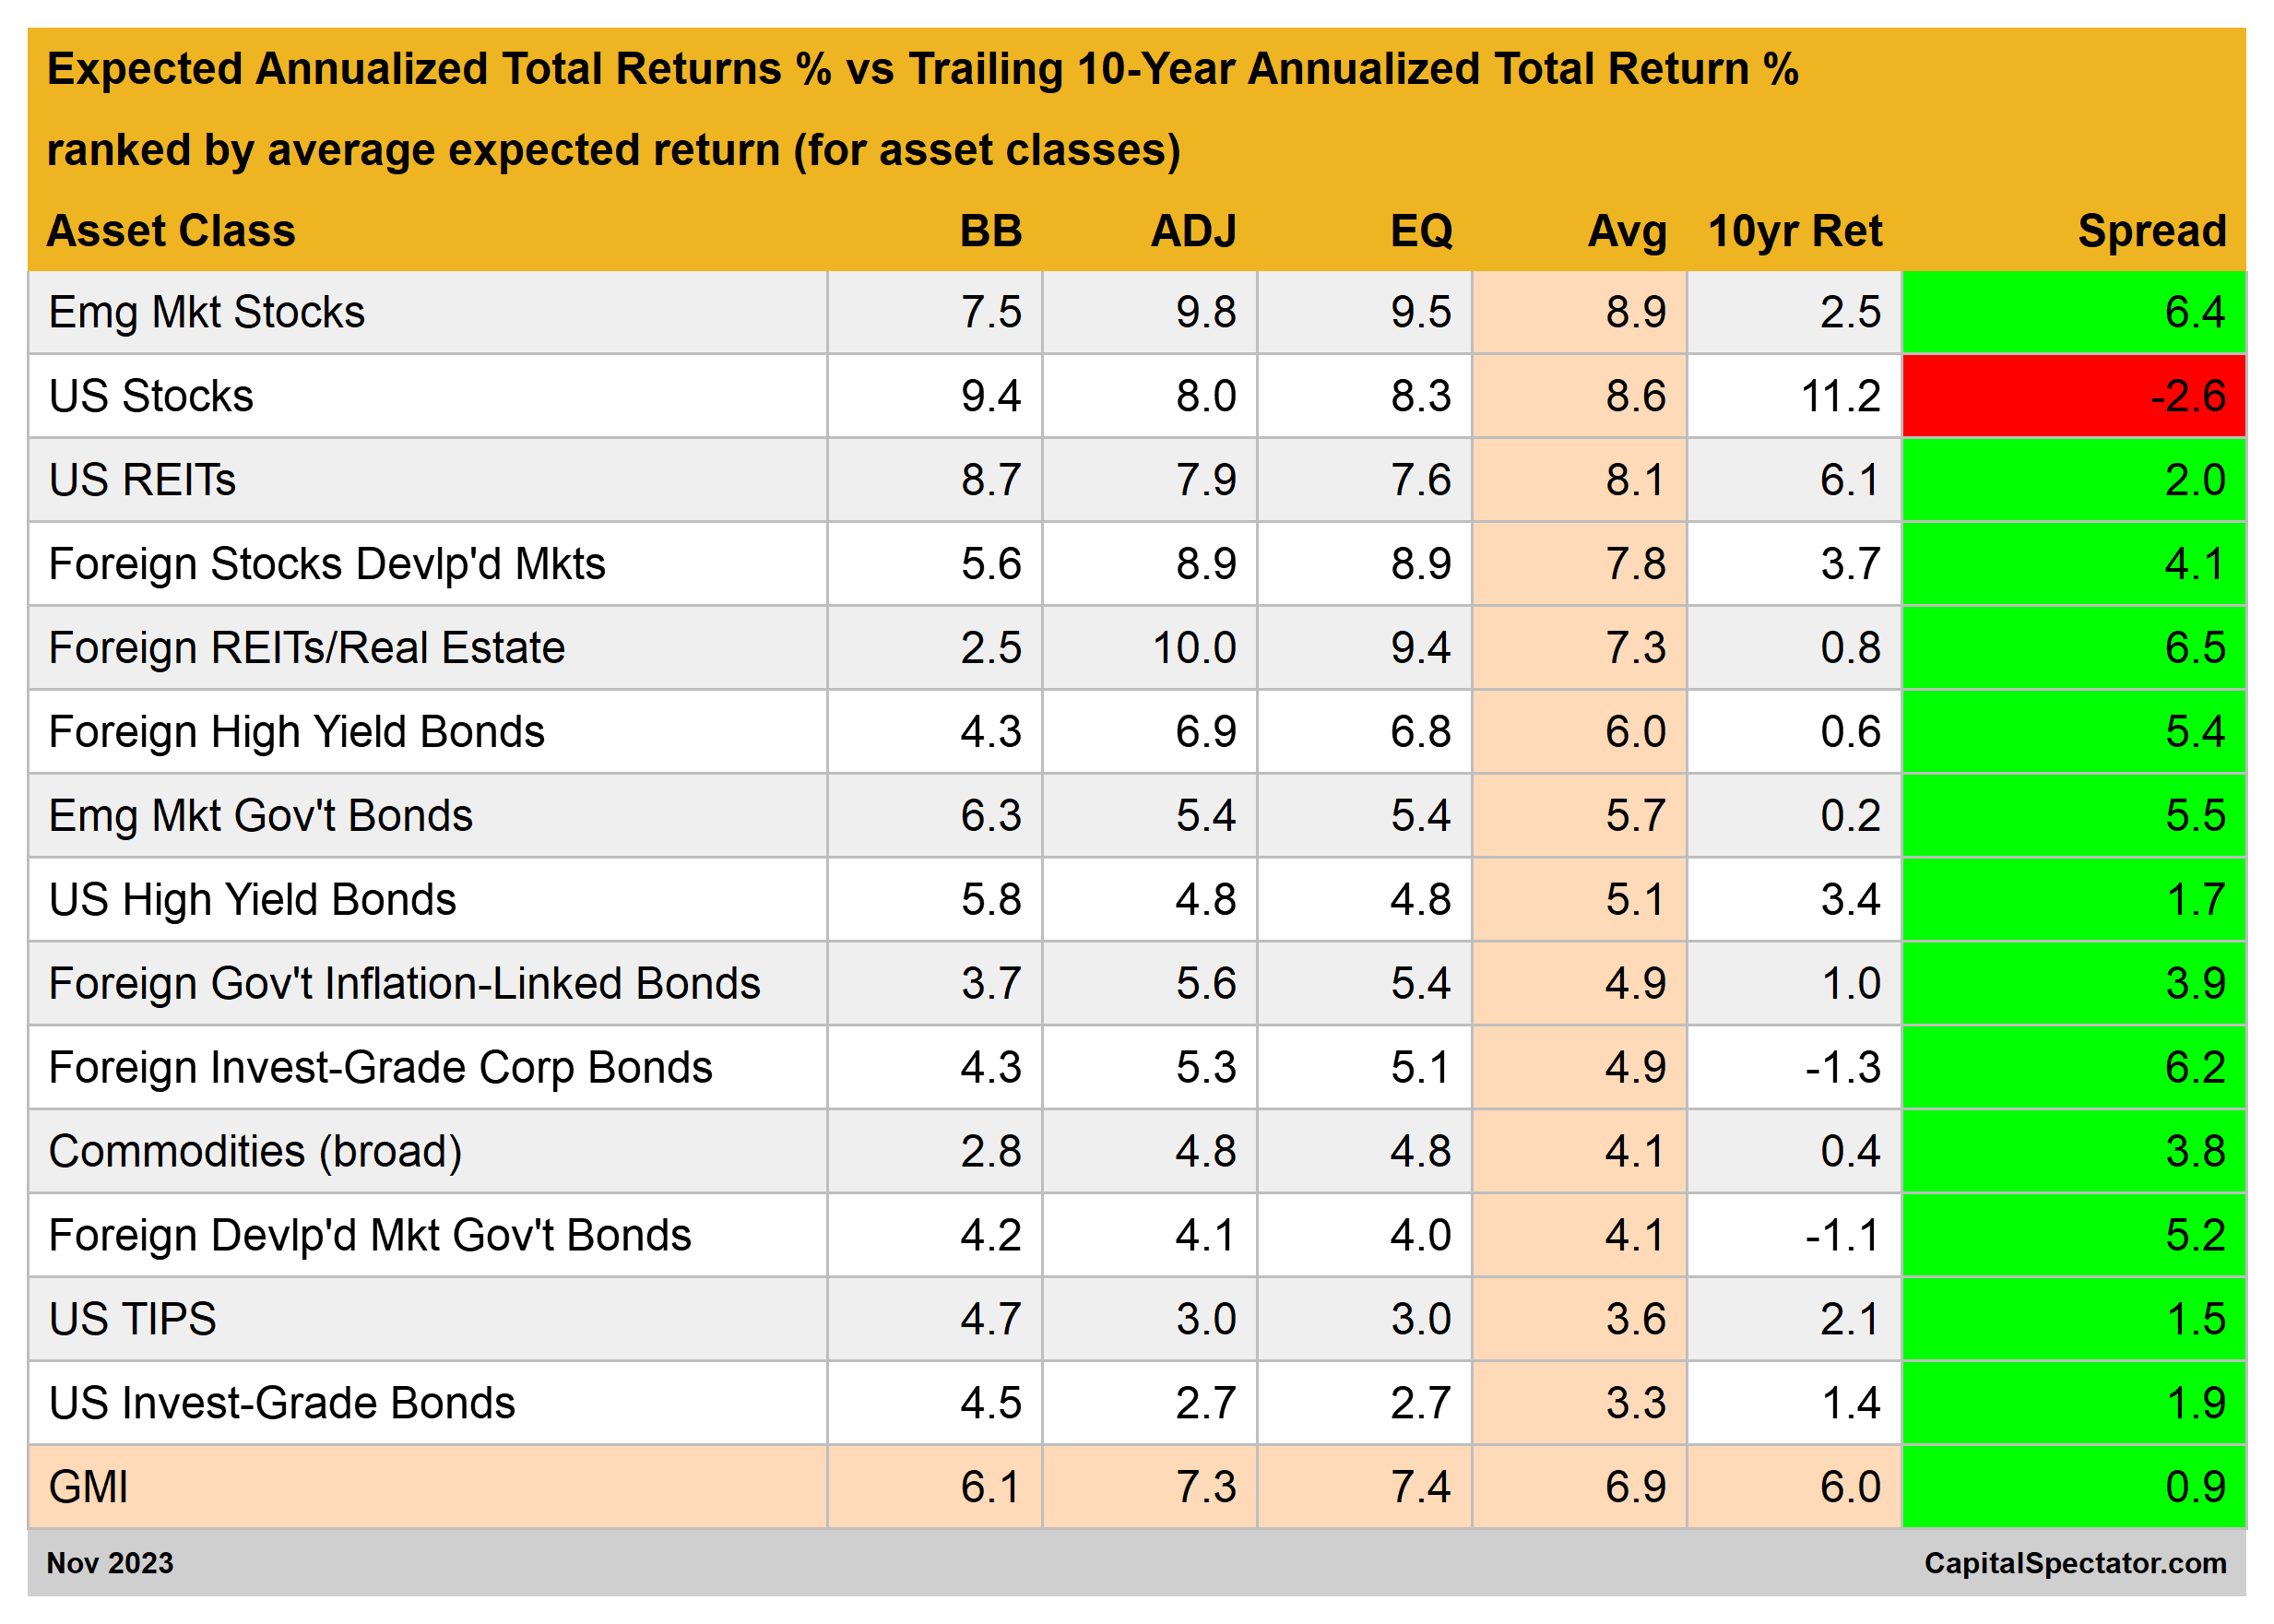 Expected Annual Total Returns